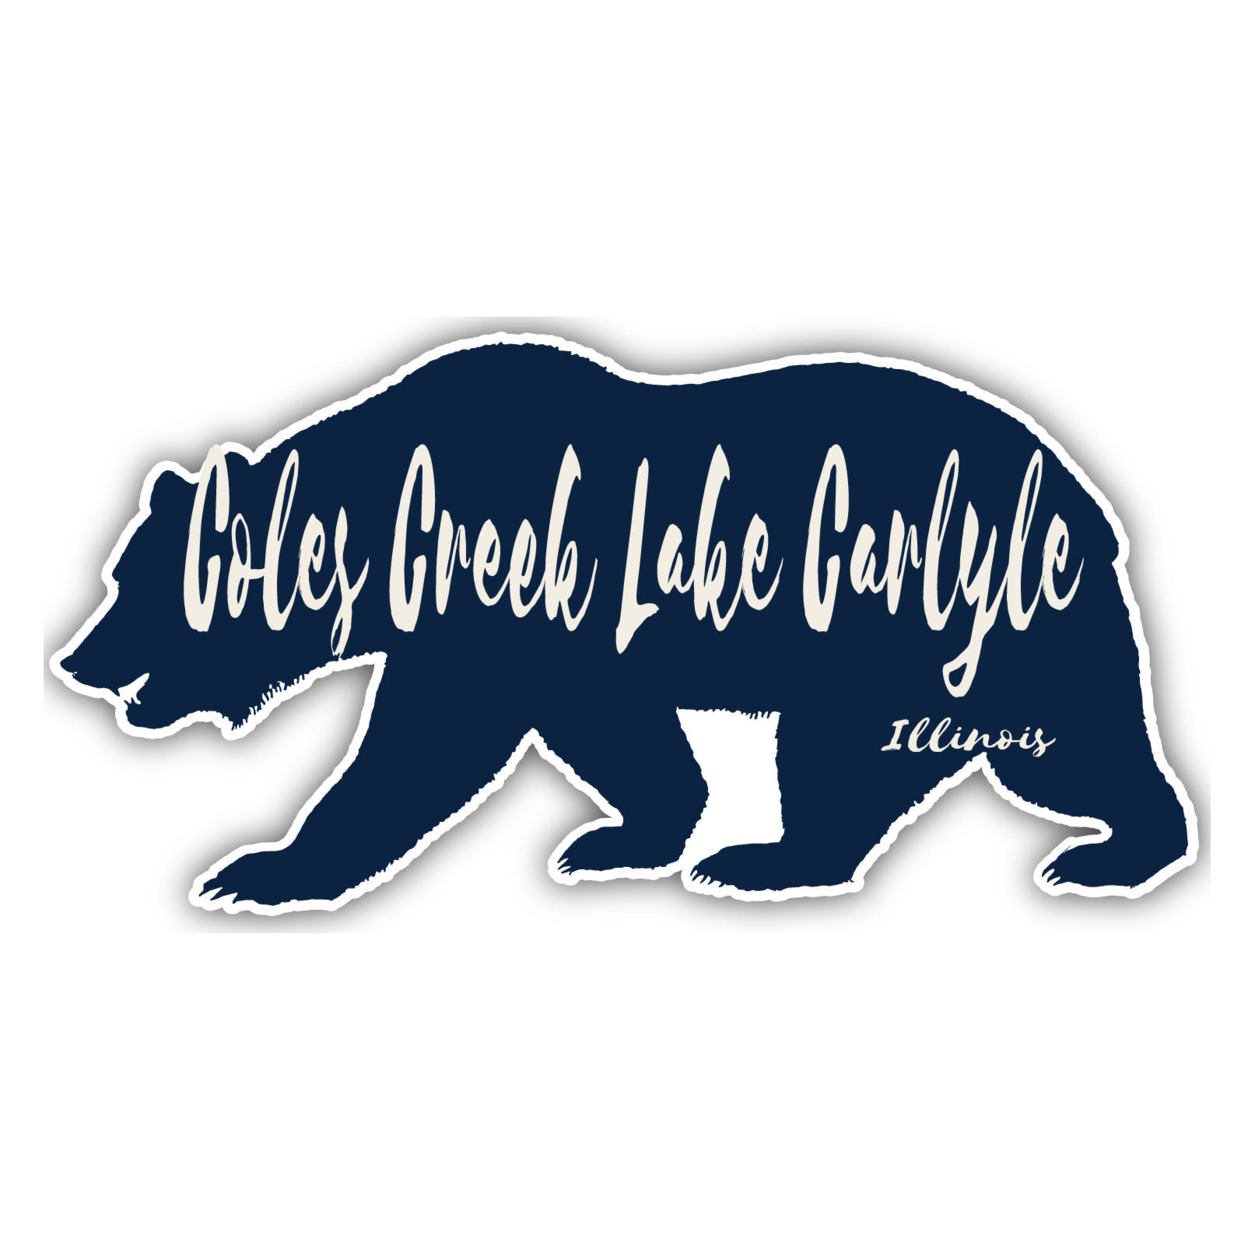 Coles Creek Lake Carlyle Illinois Souvenir Decorative Stickers (Choose Theme And Size) - 4-Pack, 10-Inch, Bear